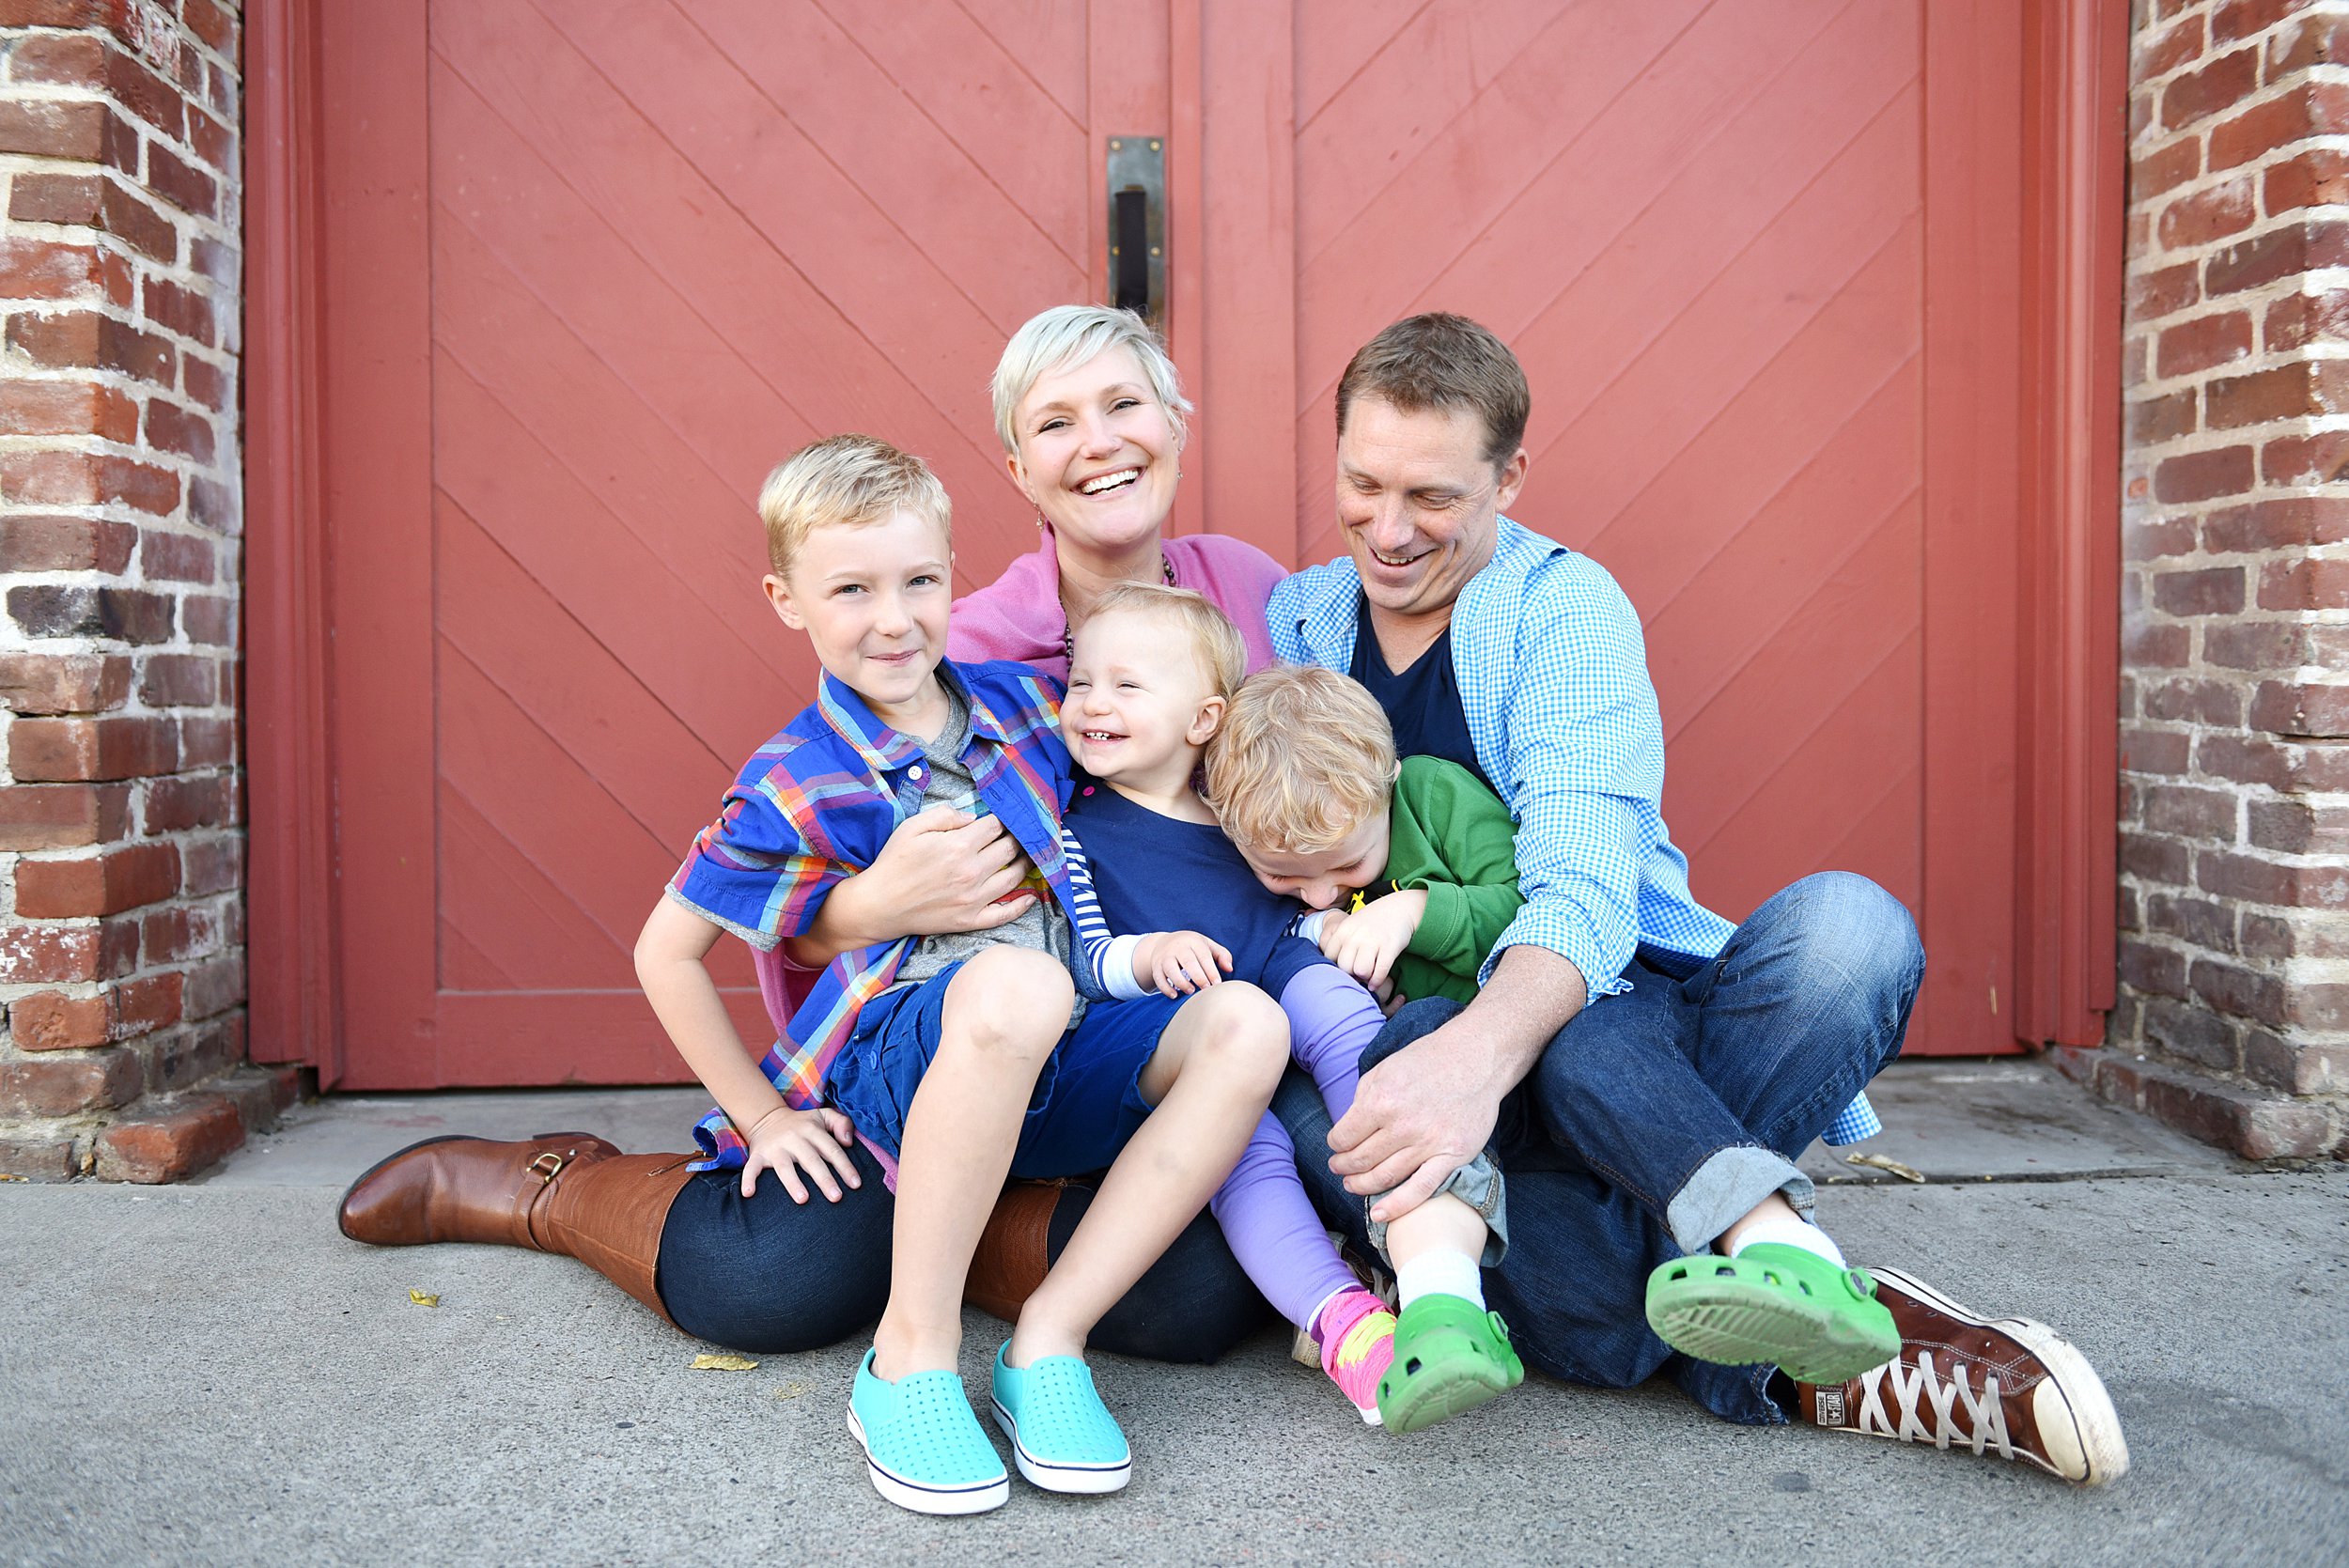 christie_spencer_photography_families_0014.jpg